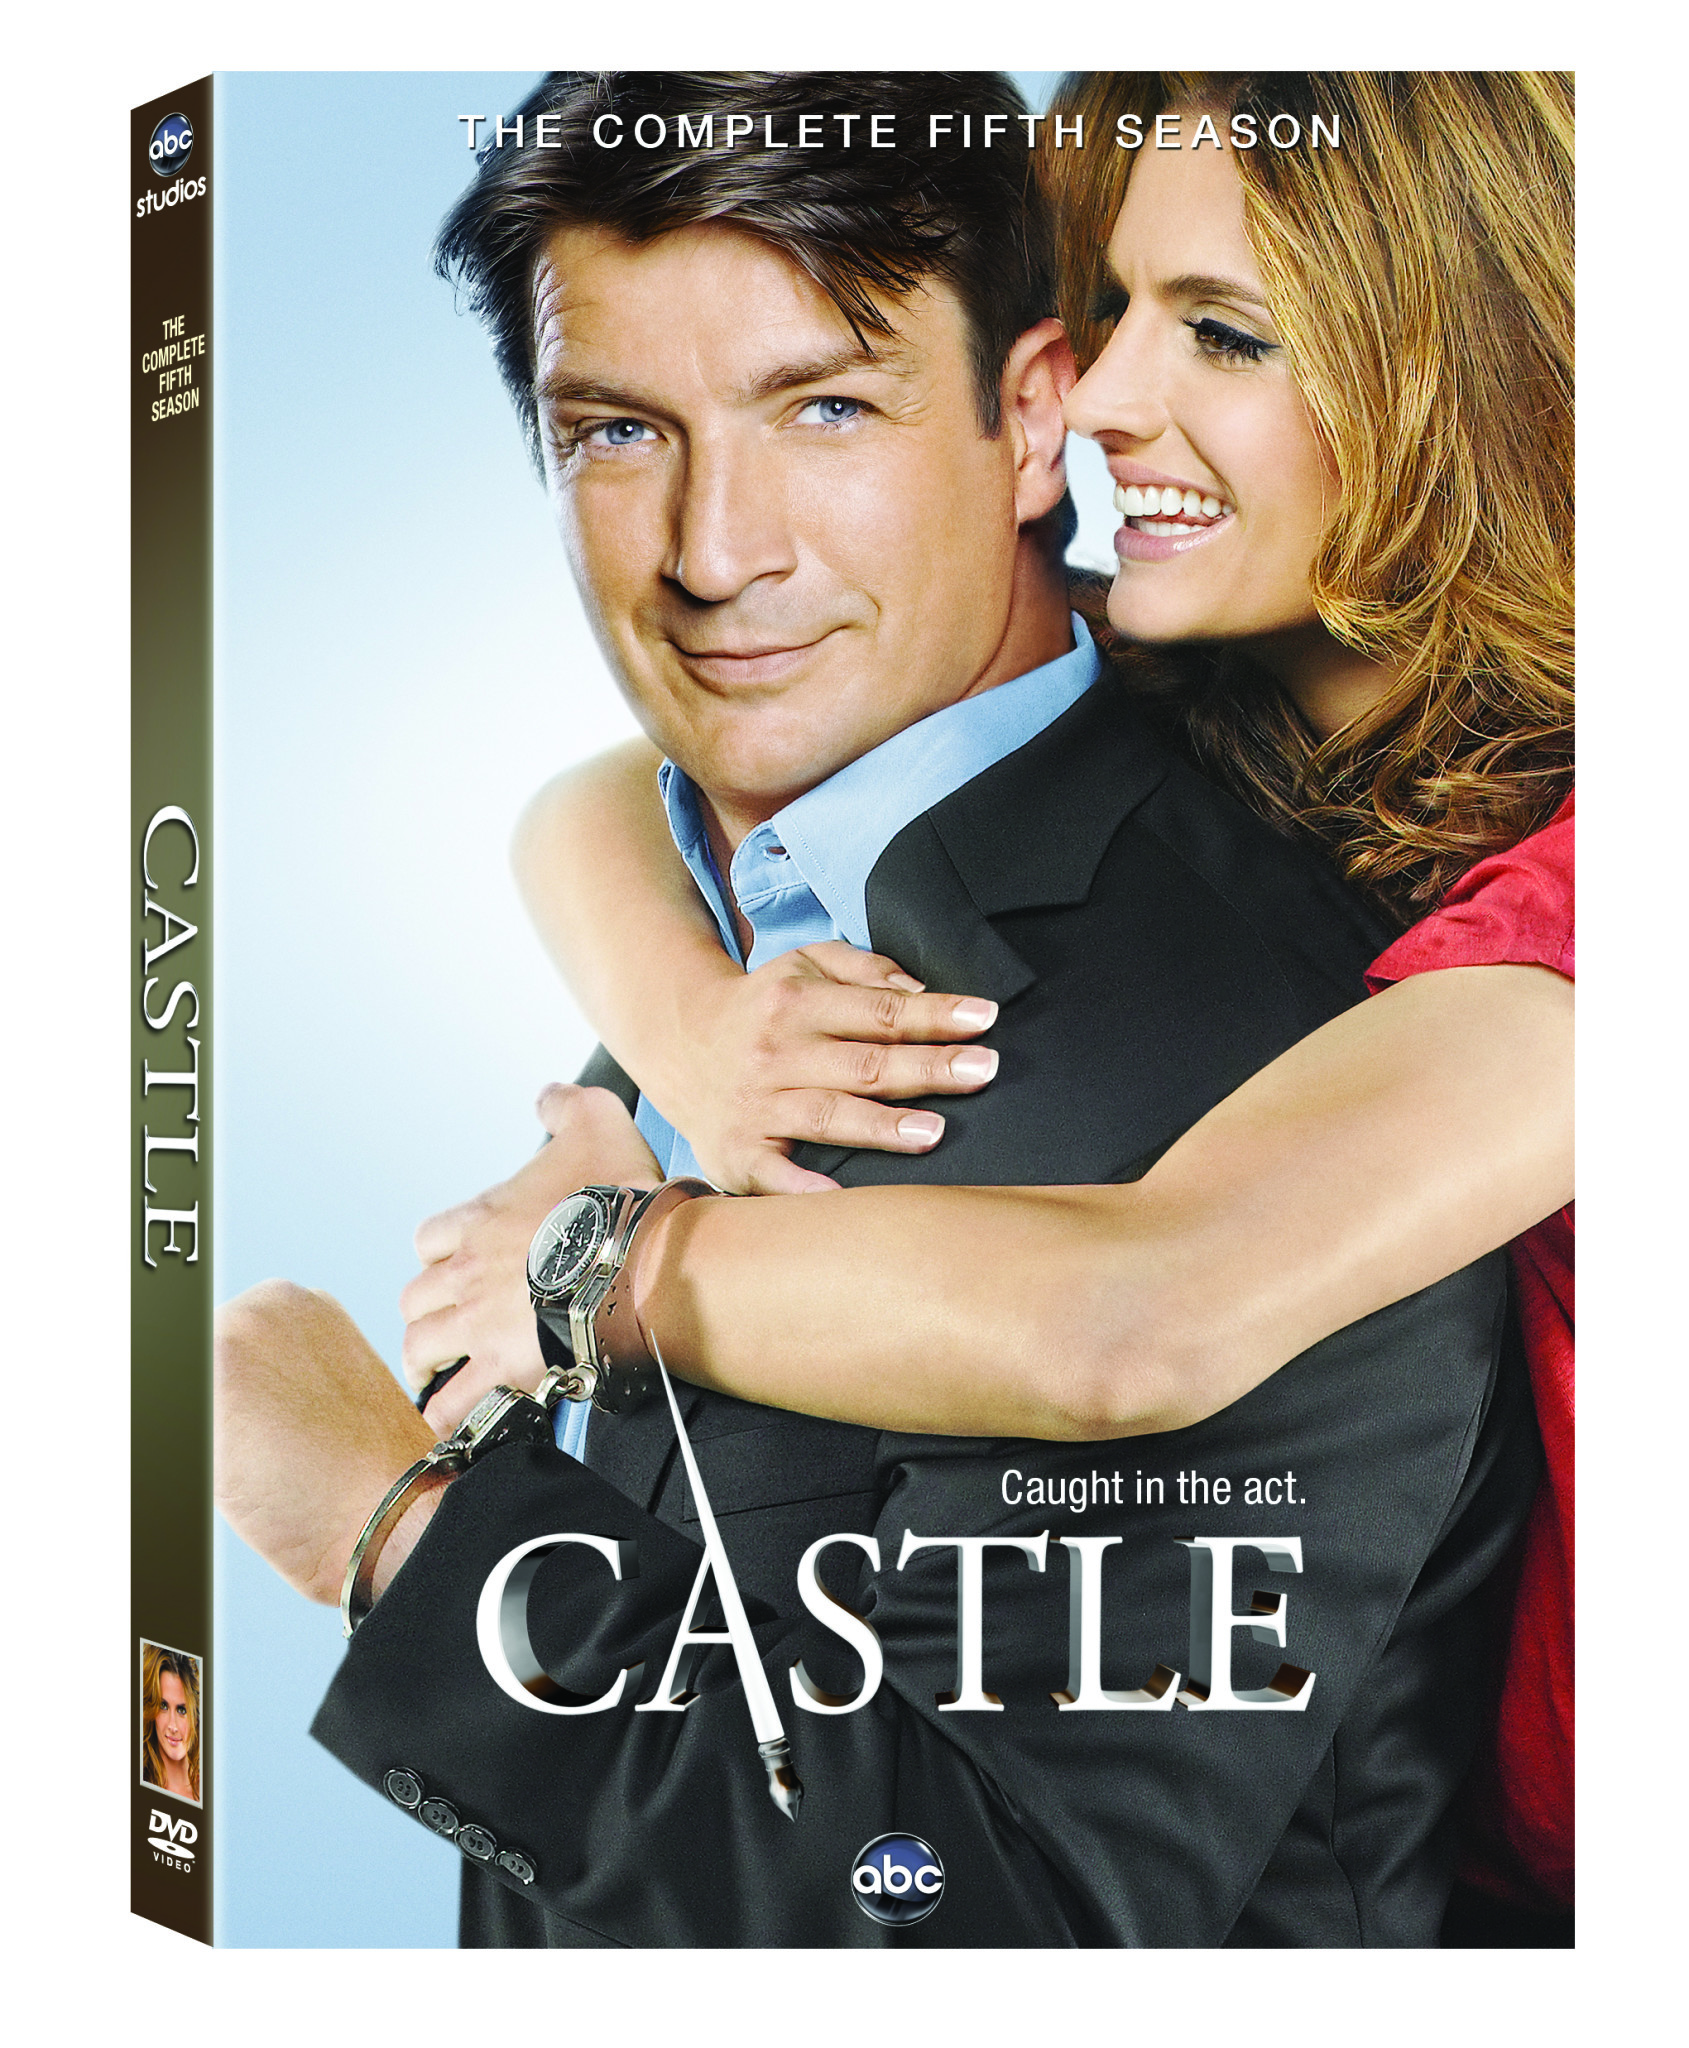 ‘Castle: The Complete Fifth Season’ DVD Review